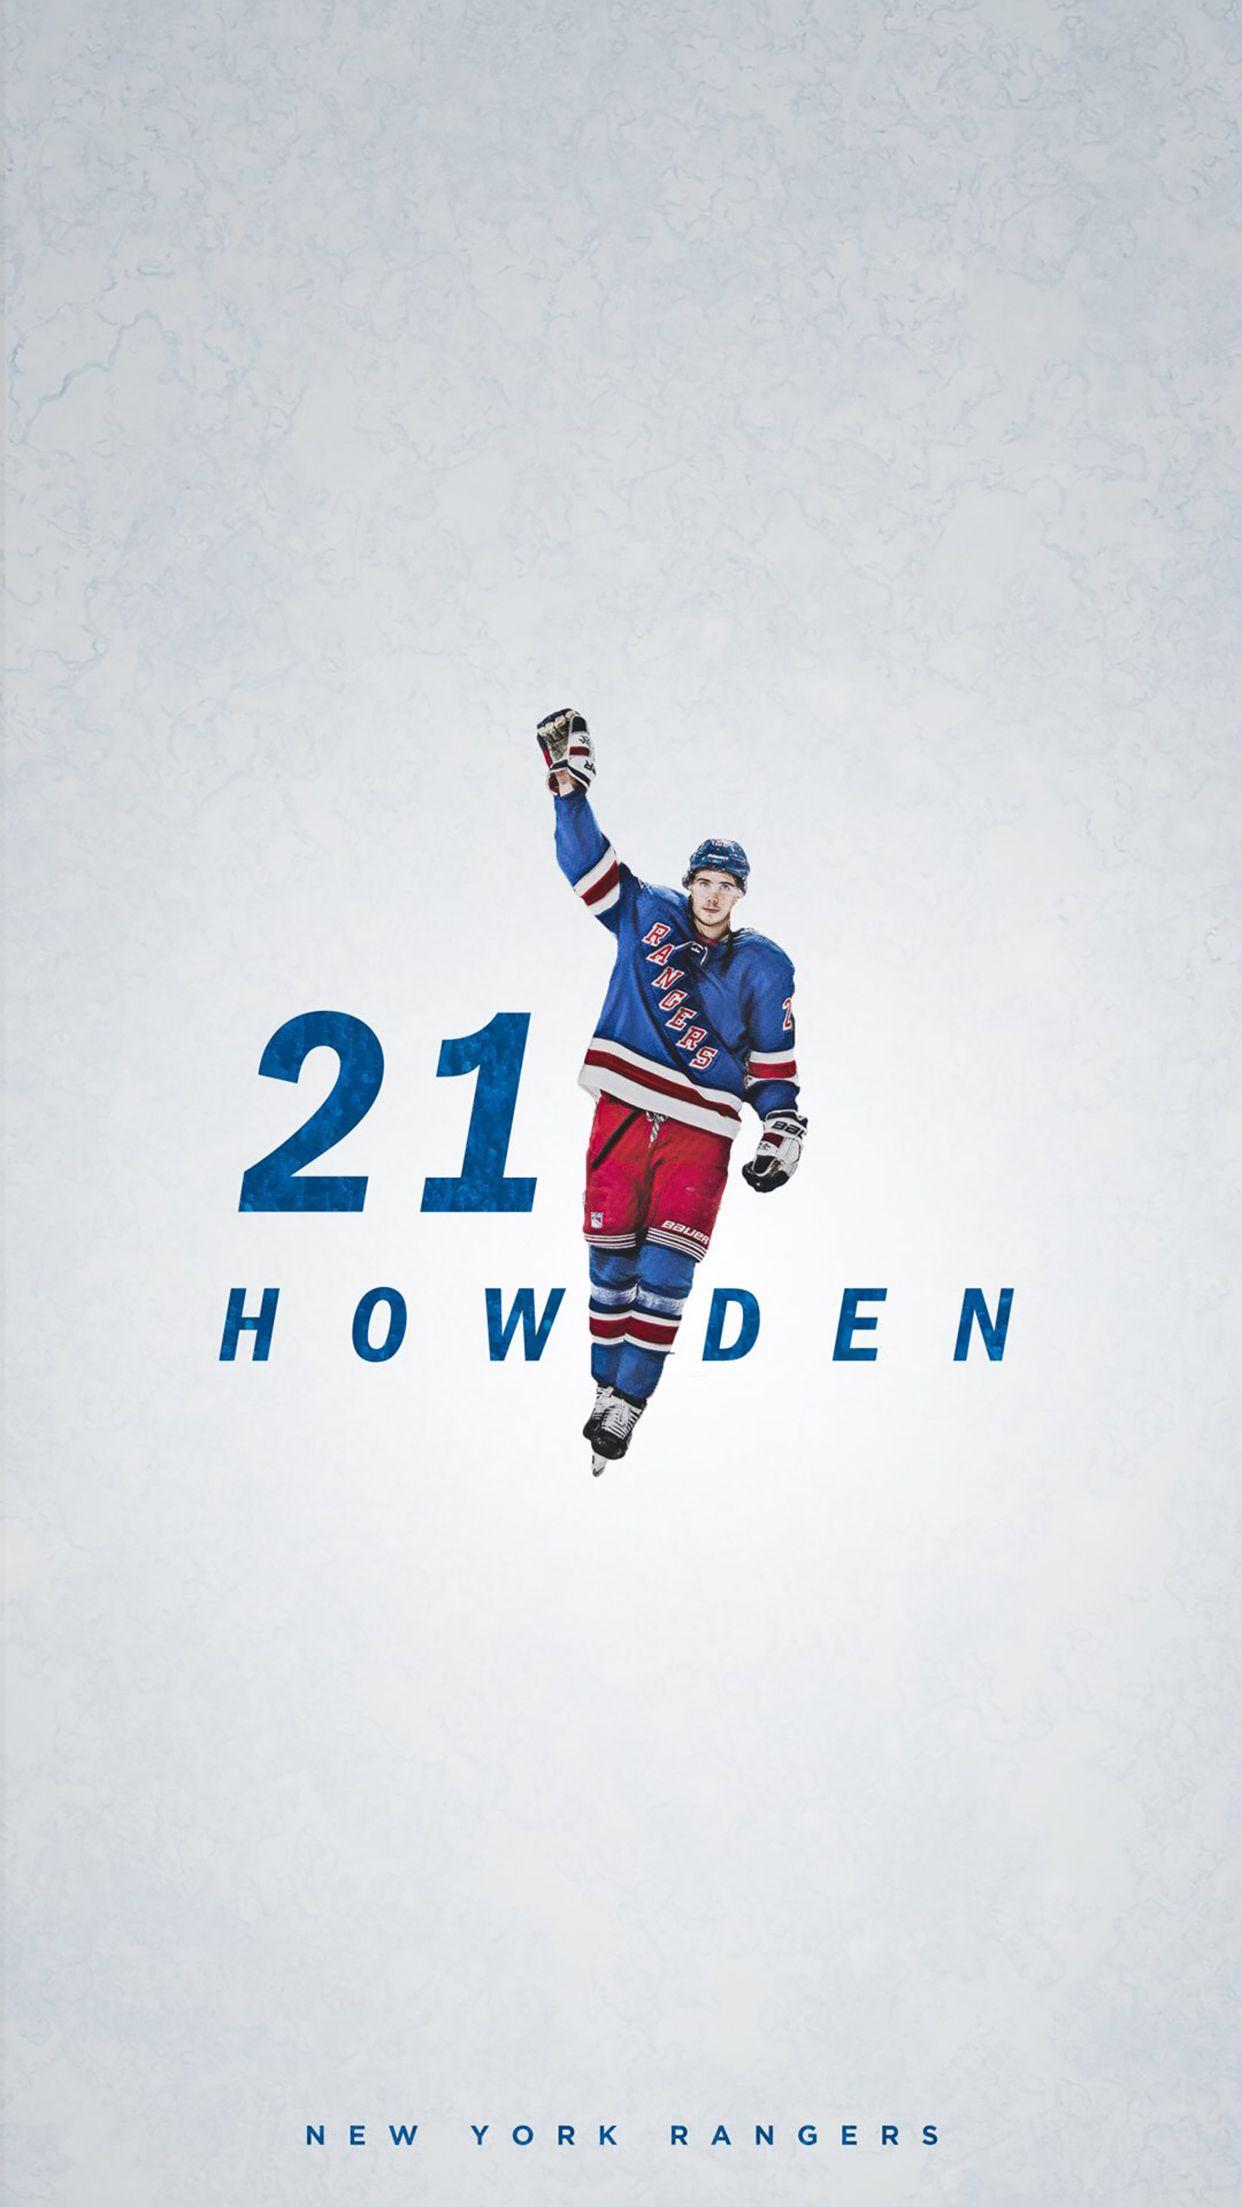 10 New Ny Rangers Iphone Wallpaper FULL HD 1920×1080 For PC